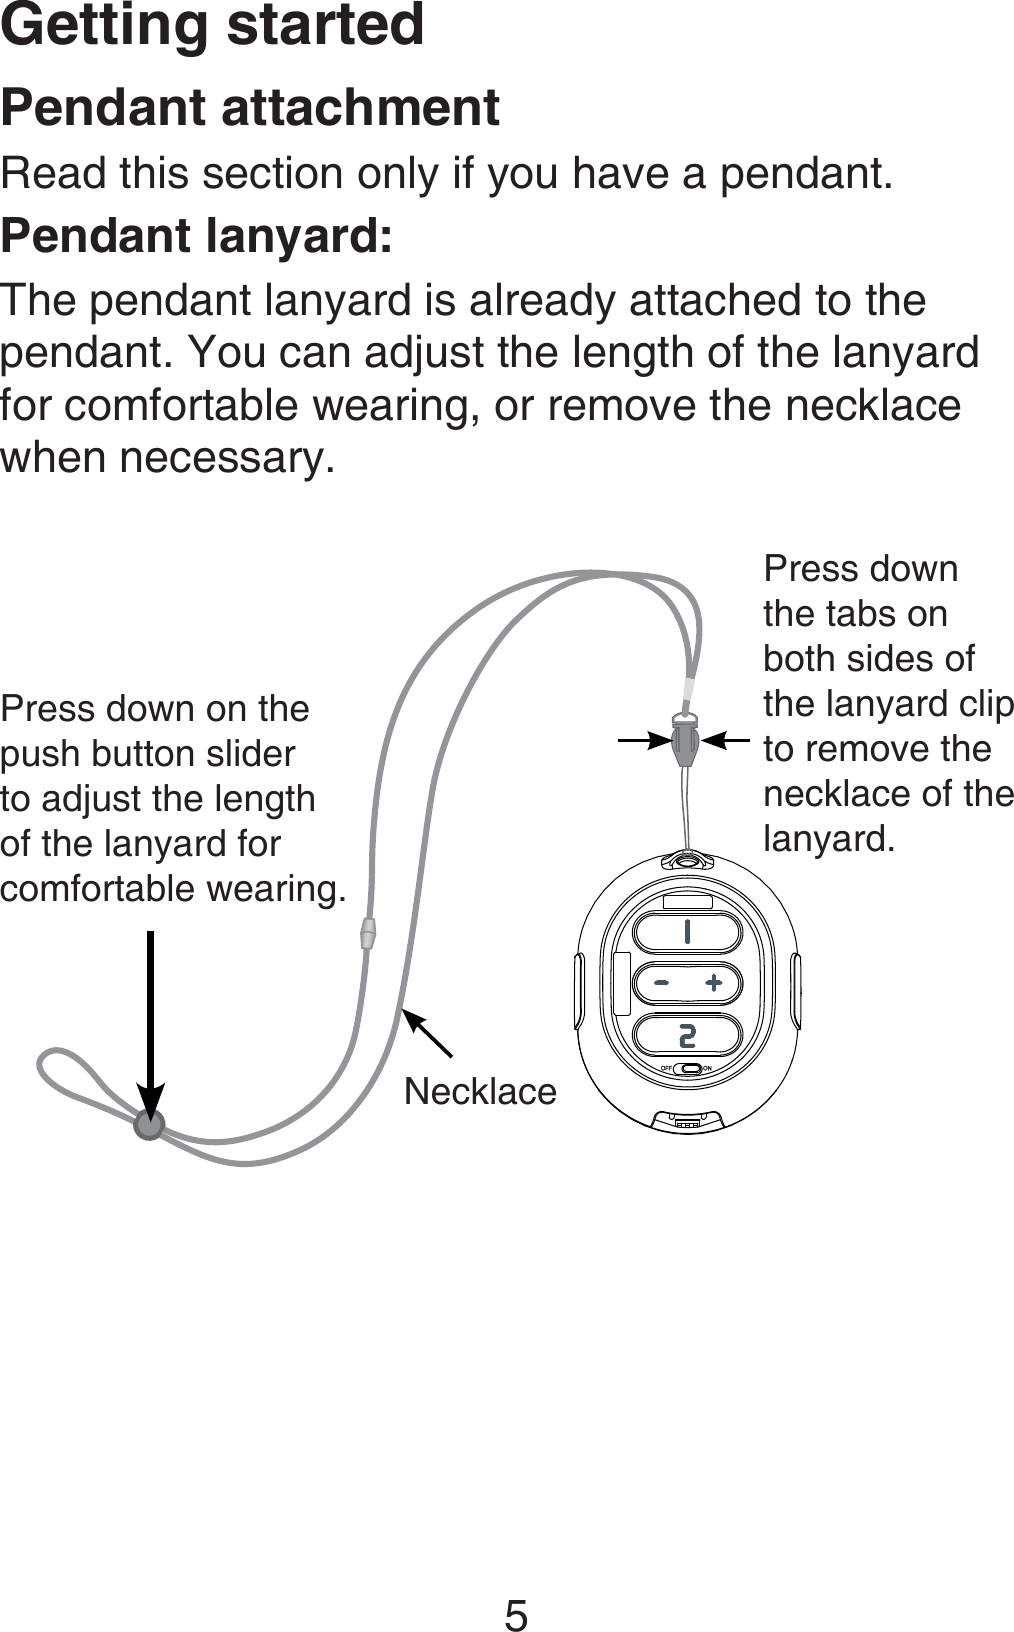 Getting started5Pendant lanyard:The pendant lanyard is already attached to the pendant. You can adjust the length of the lanyard for comfortable wearing, or remove the necklace when necessary.Press down on the push button slider to adjust the length of the lanyard for comfortable wearing.NecklacePendant attachmentRead this section only if you have a pendant.Press down the tabs on both sides of the lanyard clip to remove the necklace of the lanyard.